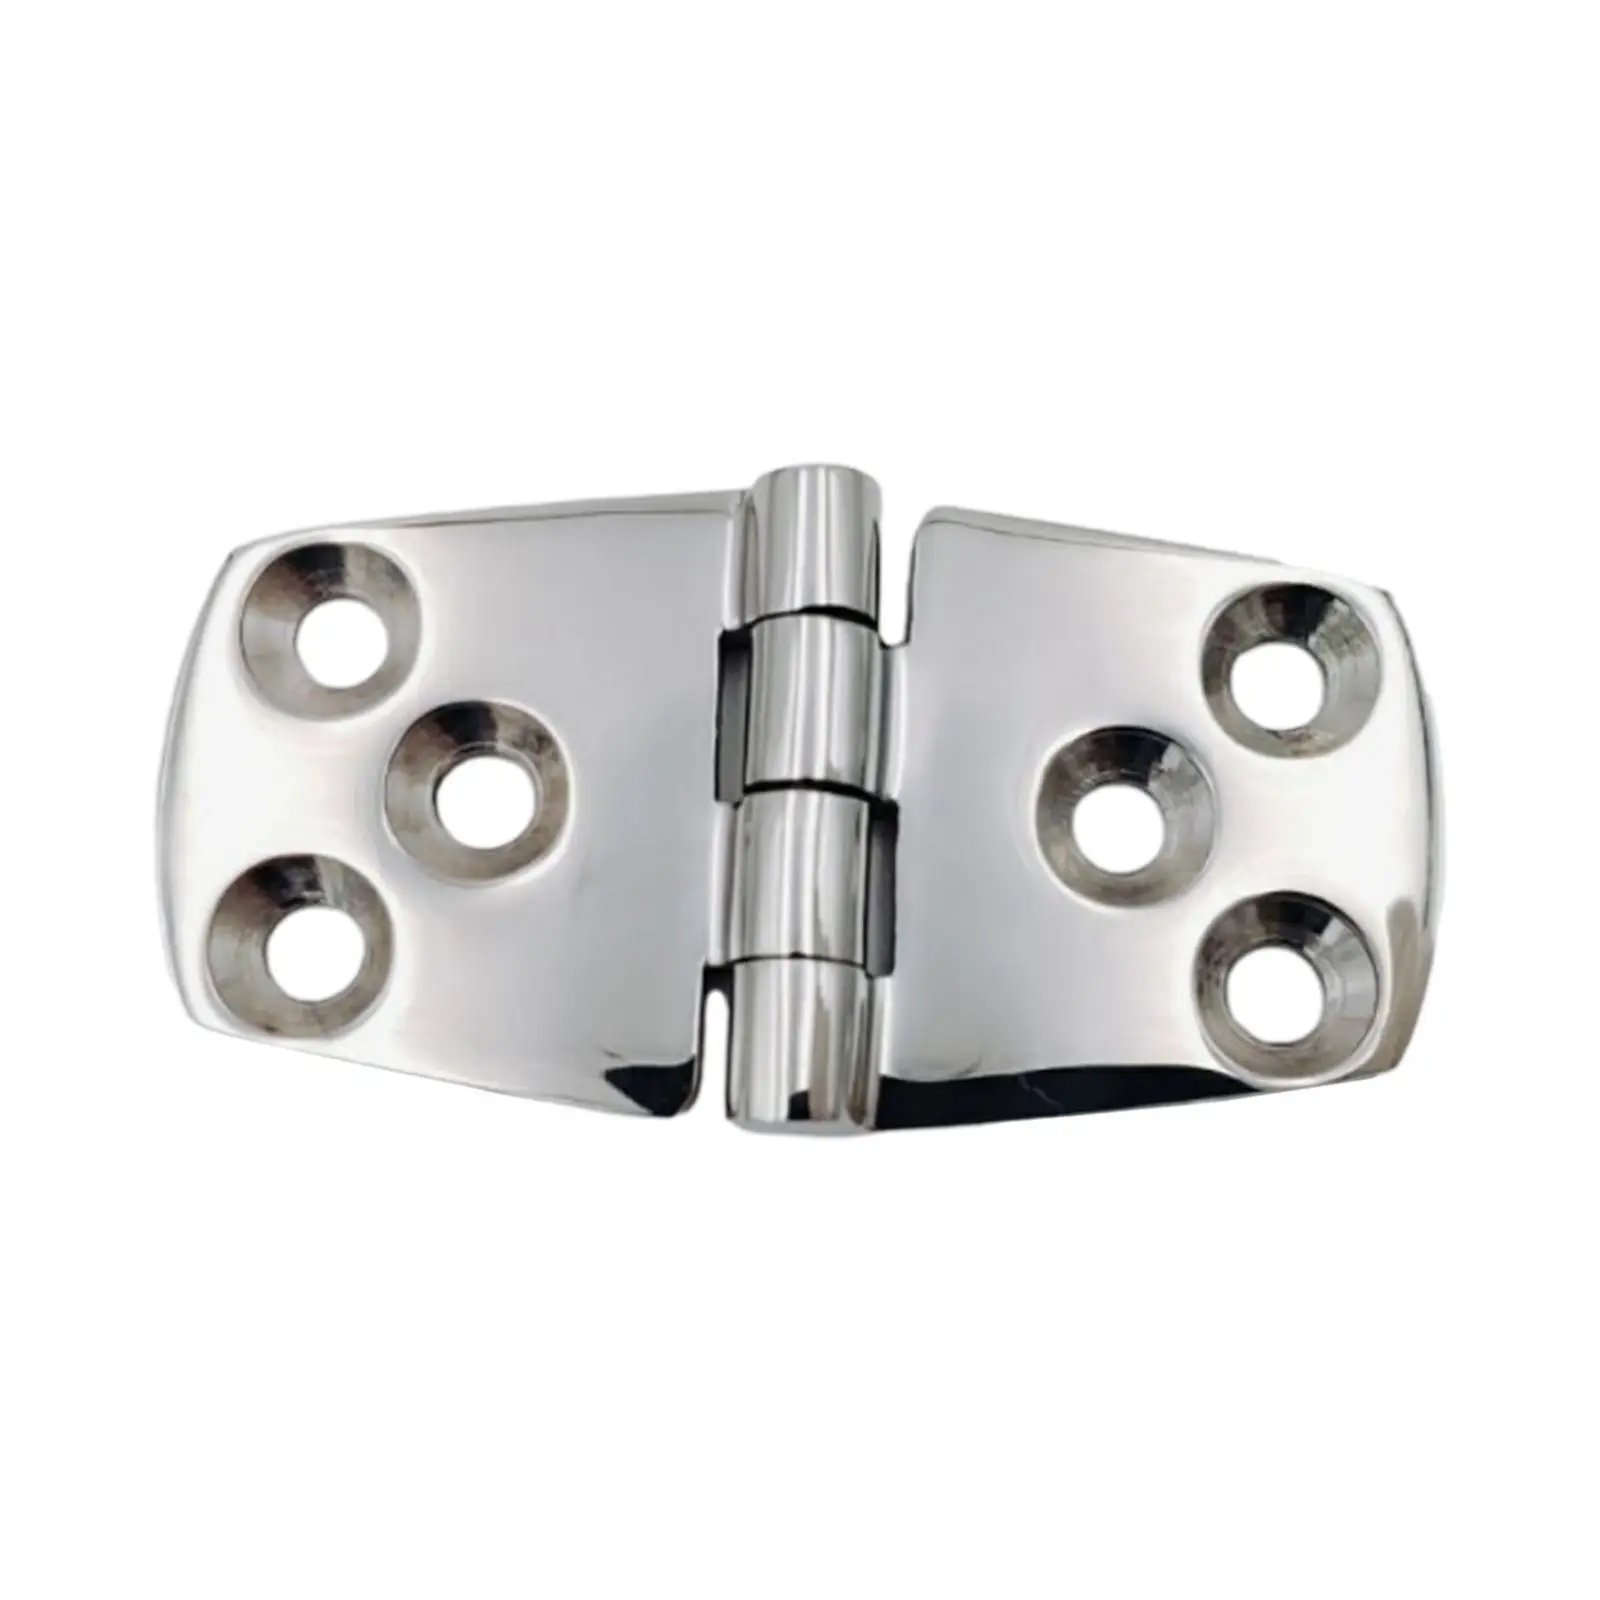 Boat Hinge 6 Holes Cast Solid Boat Strap Hinge Accessories Stainless Steel Polished for Door RV Window Hatch Cabinet